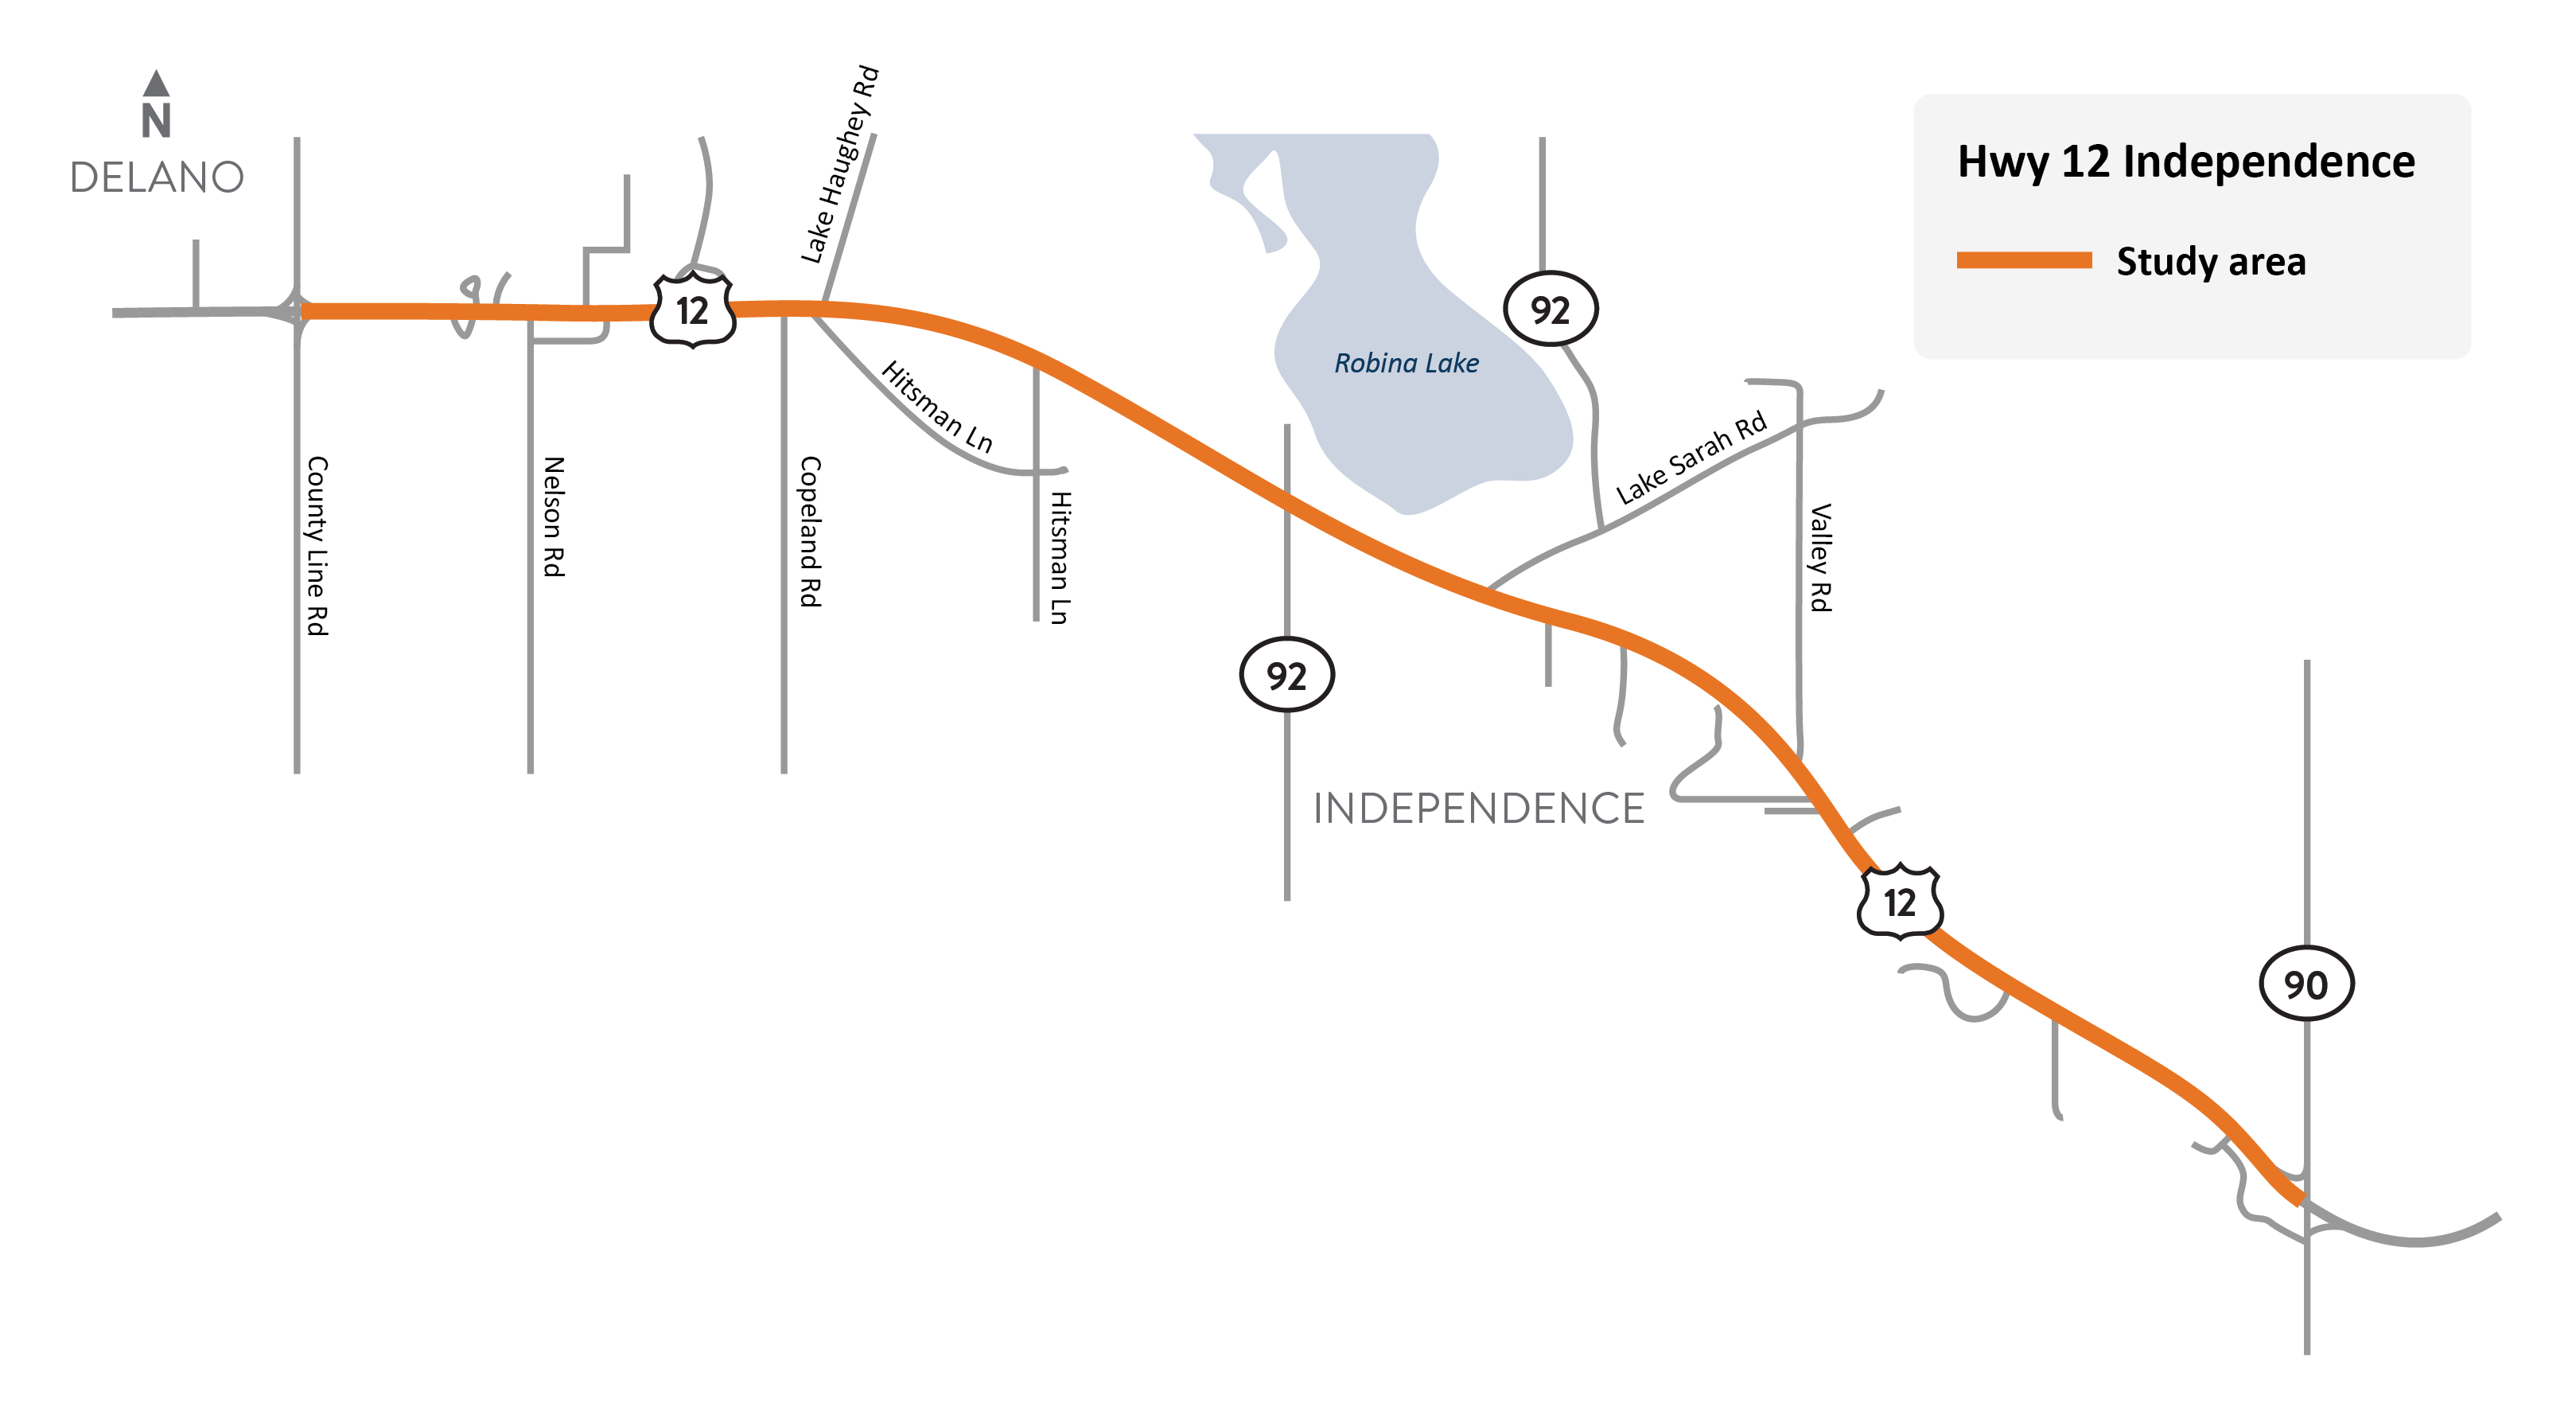 Hwy 12 study location map from Delano to Independence